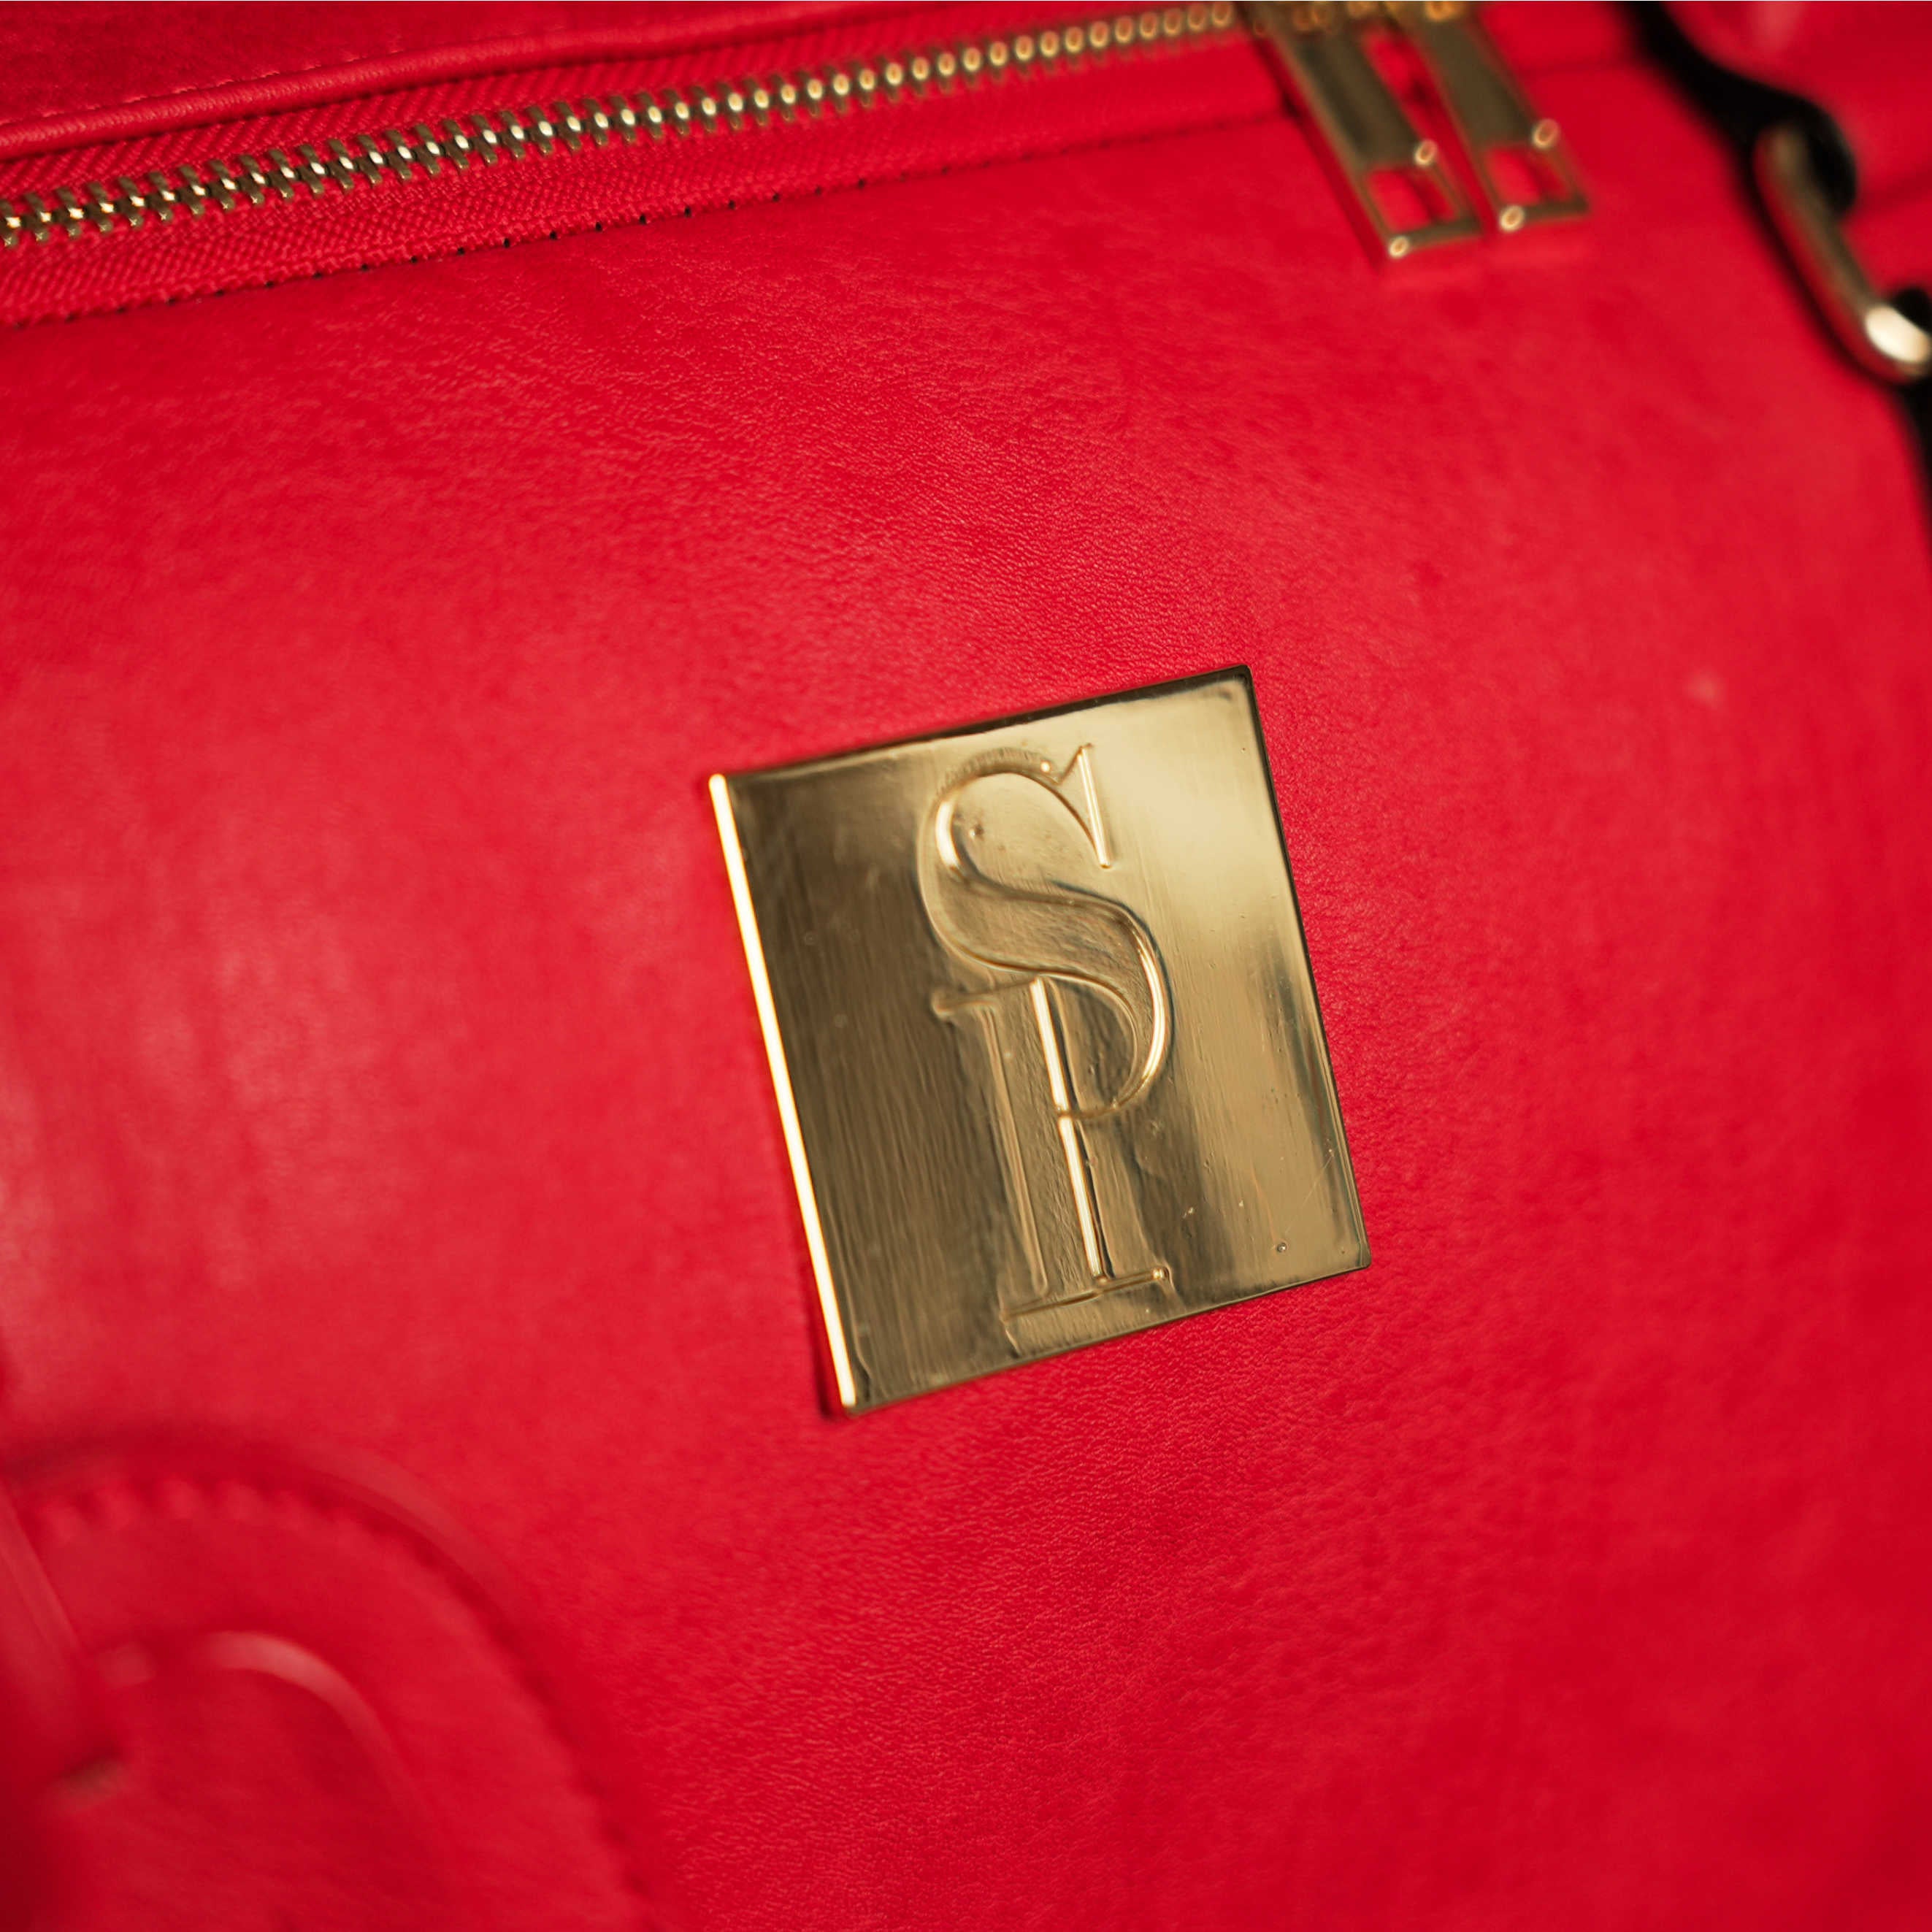 Red Tumbled Leather Duffle Bag (New Weekender Design) - Sole Premise